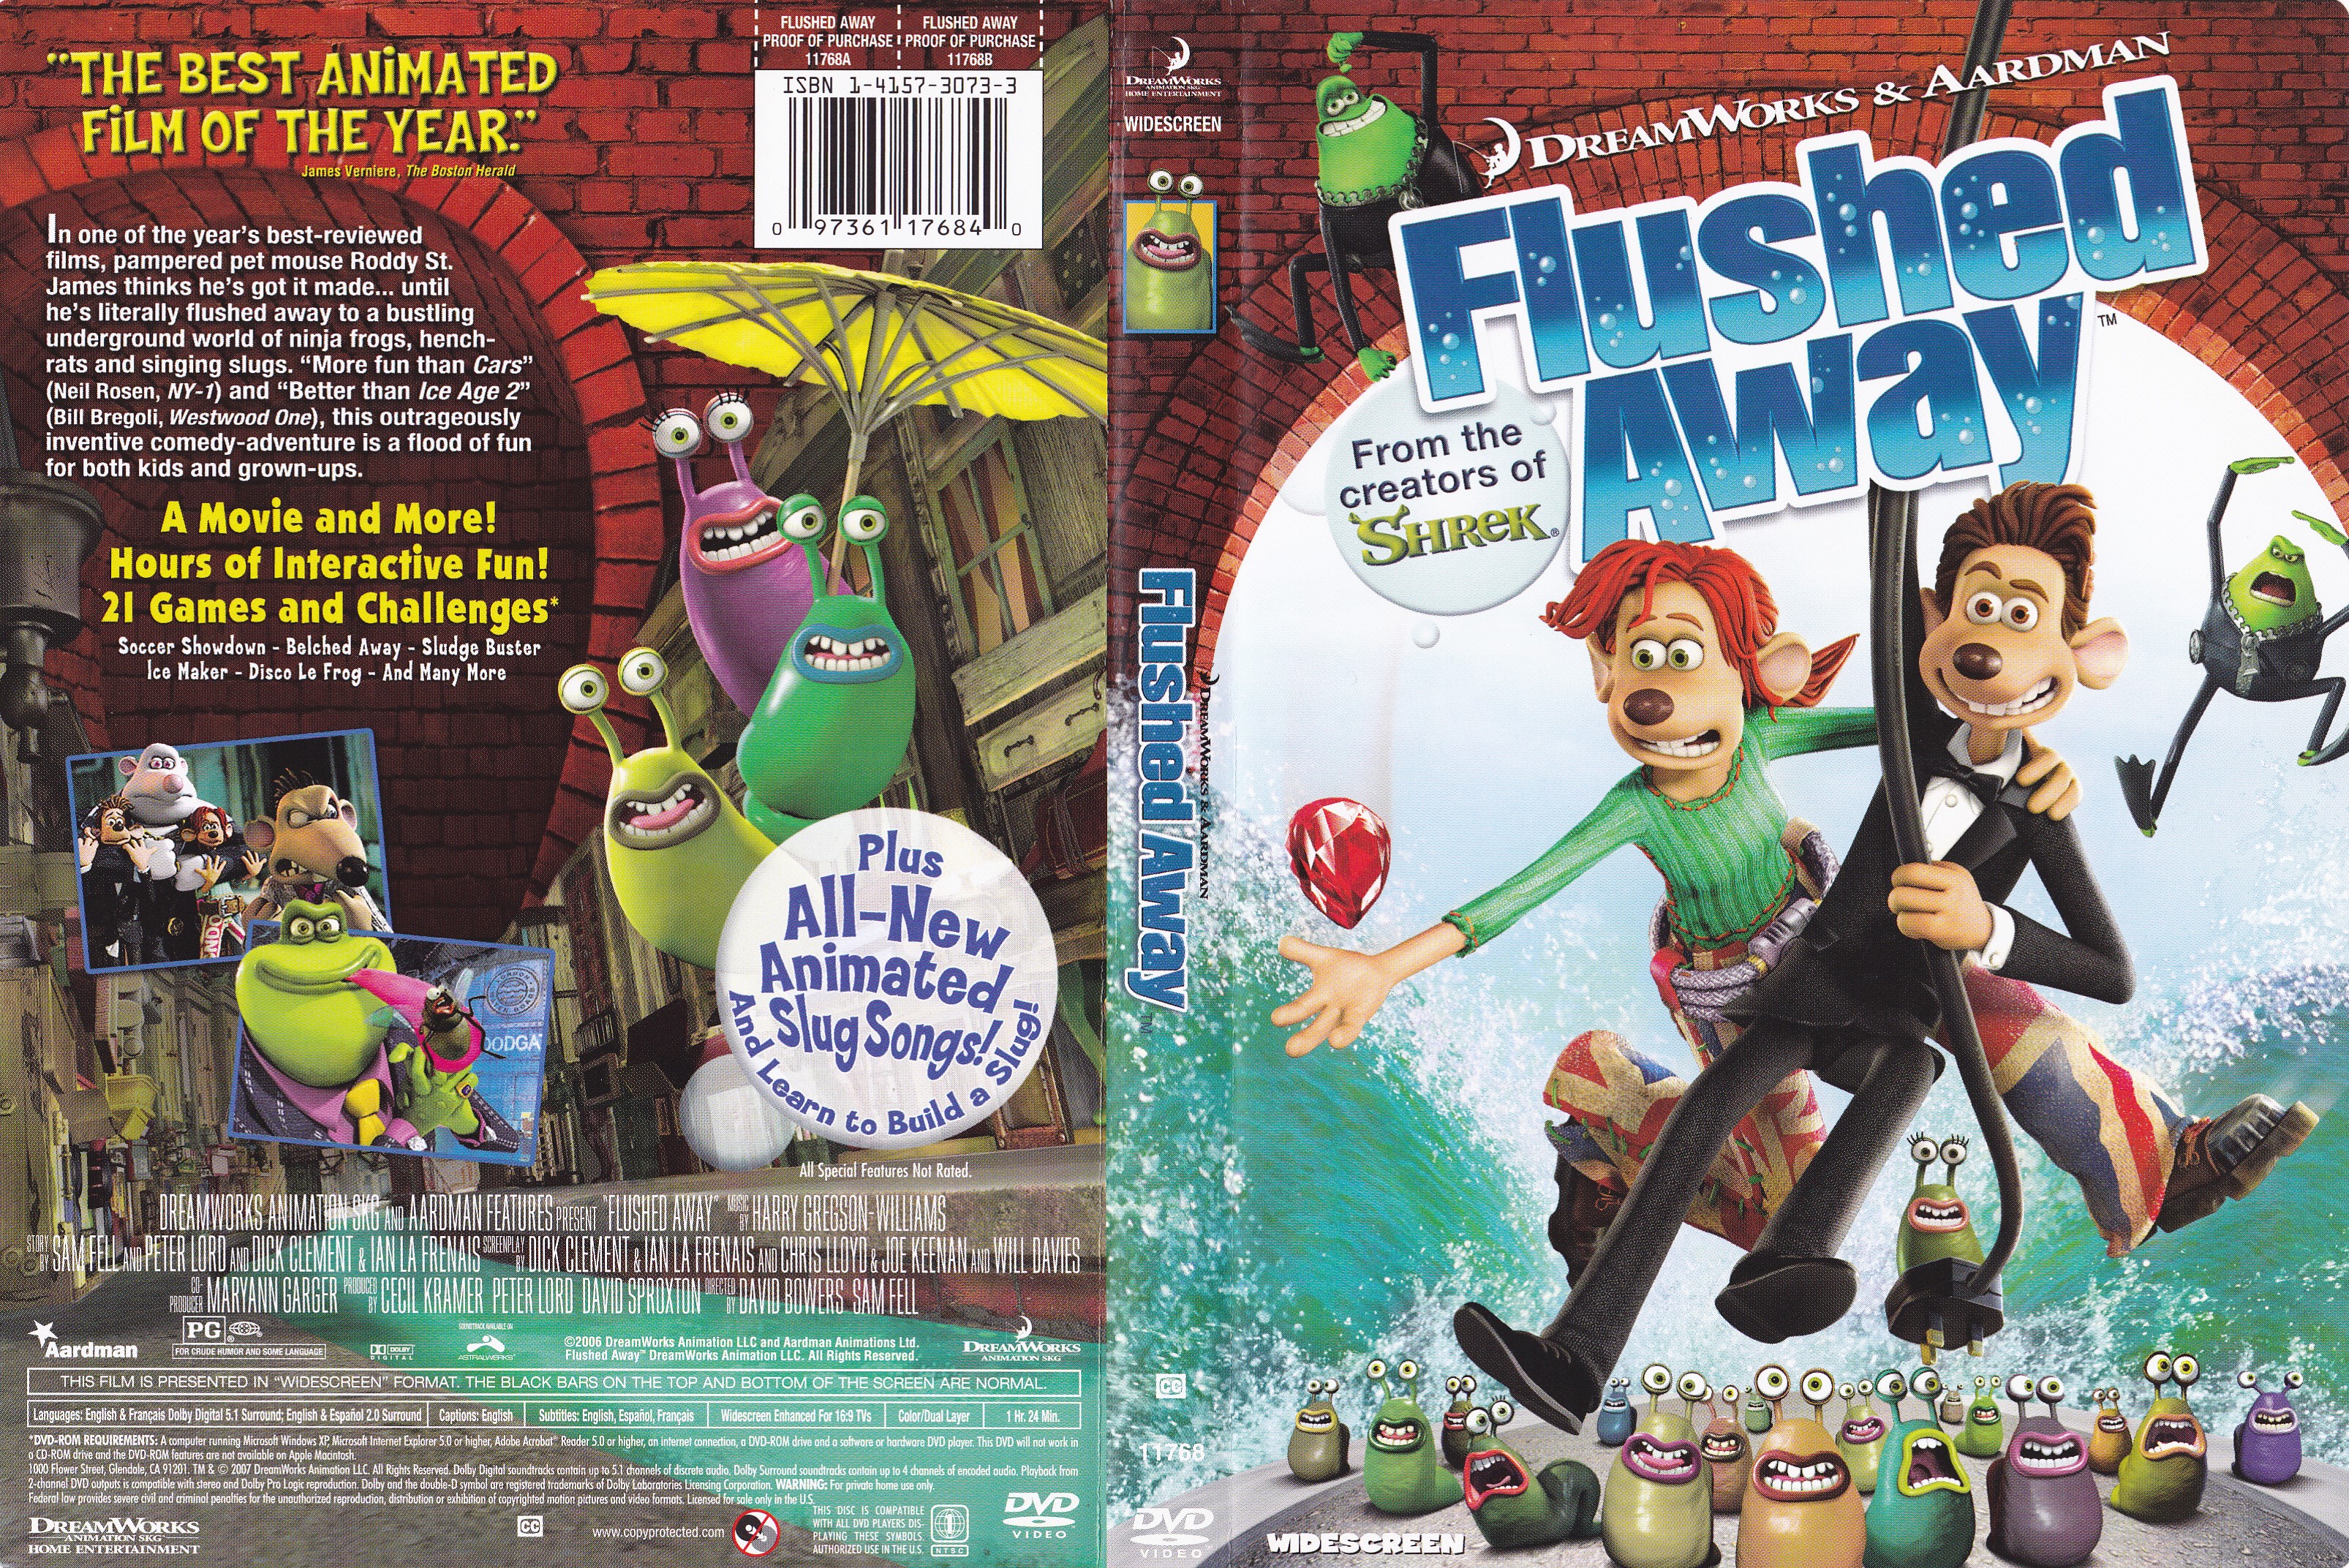 Jaquette DVD Flushed away - Souris city (Canadienne)